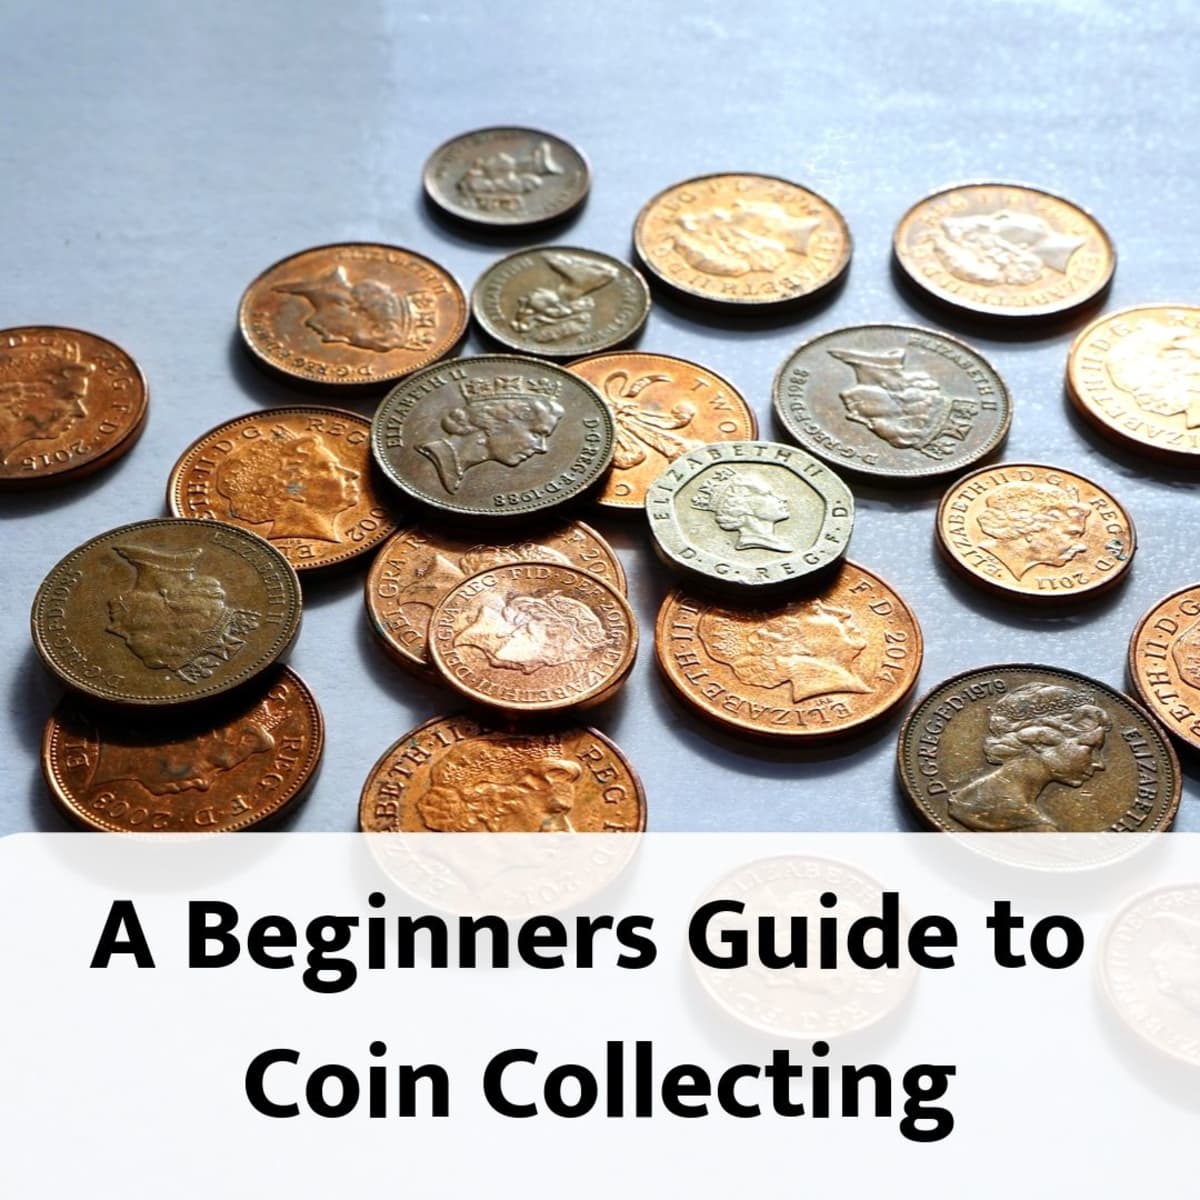 The 7 Important Supplies Every New Coin Collector Should Have, by  Metals.com